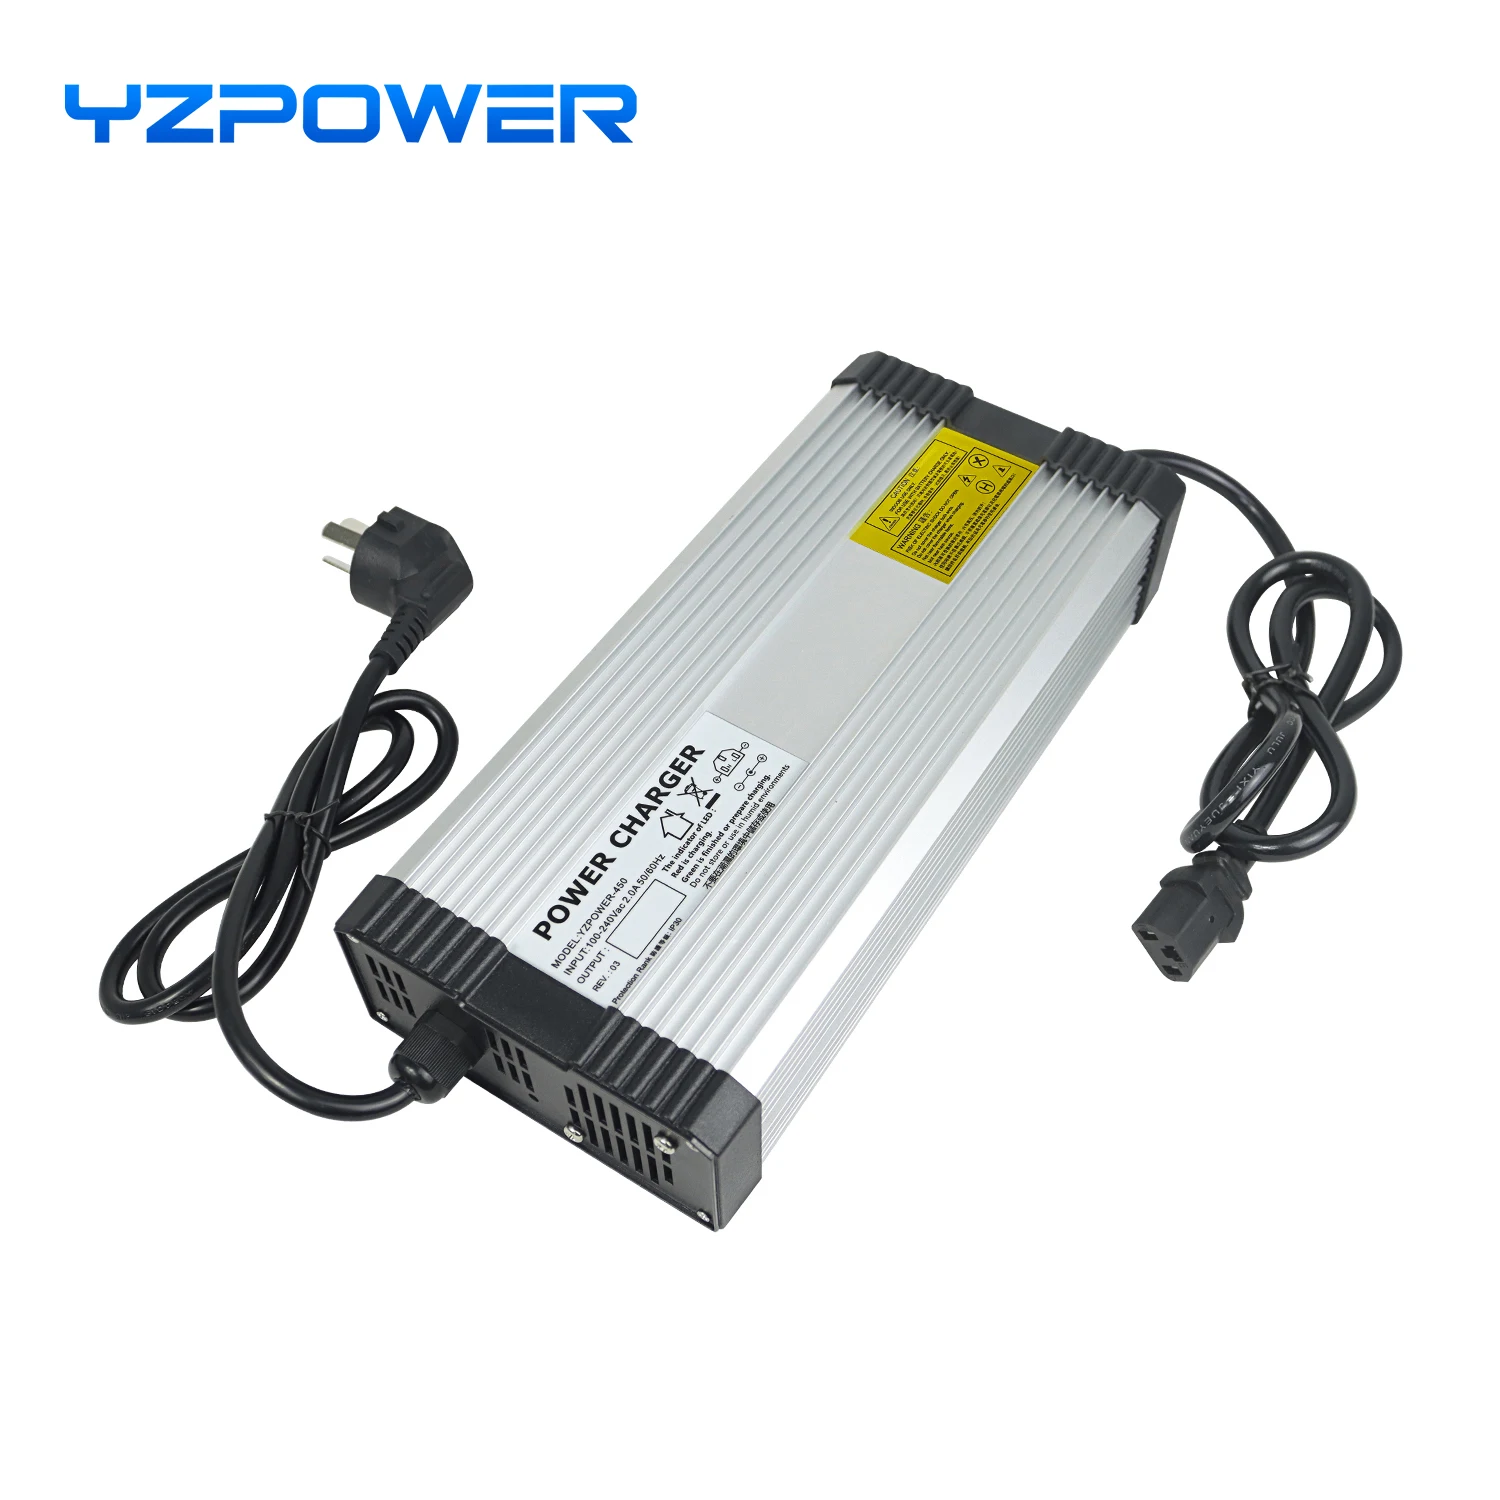 

YZPOWER 50.4V 15A Lithium Battery Charger Lithium ion Chargers Power Supply for 44.4V Li Ion Ebike Chargeur Pile